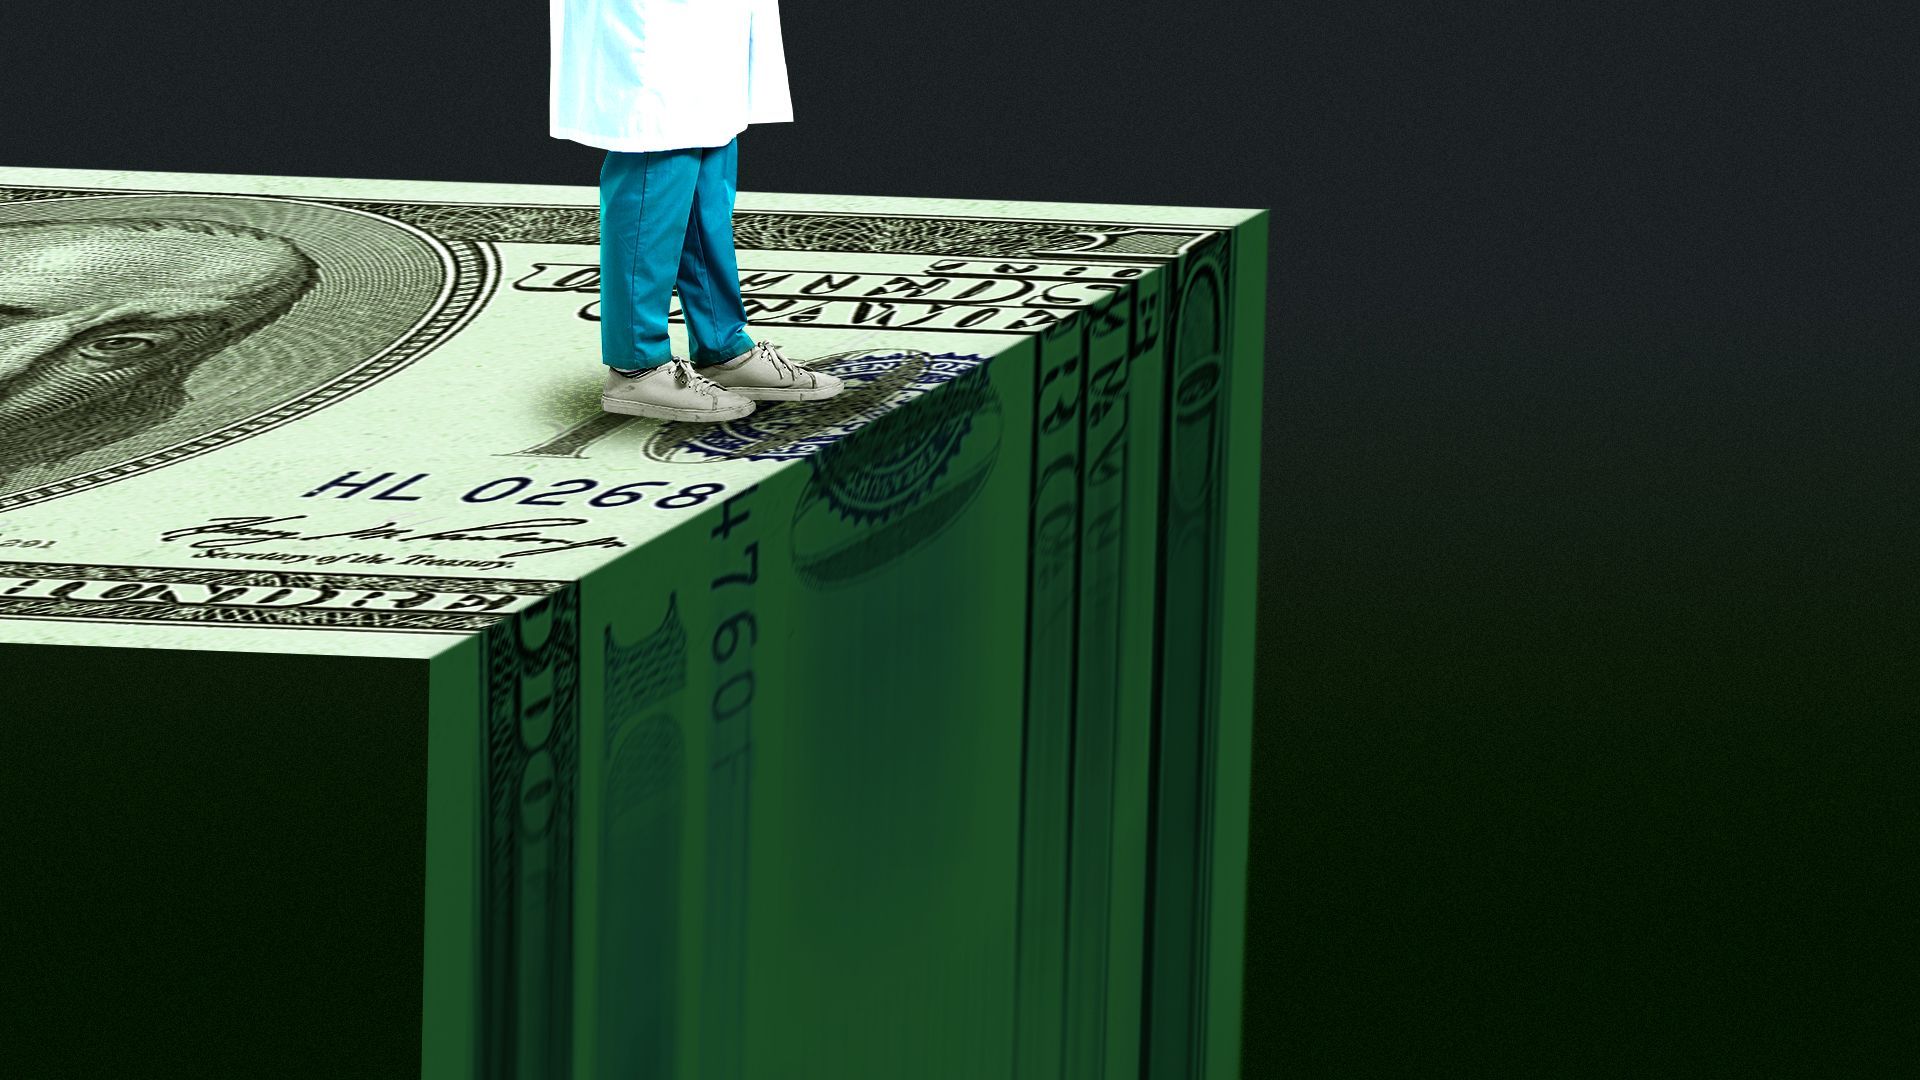 Illustration of a doctor in a white coat and scrubs standing at the end of a cliff formed by a large one hundred dollar bill which is laid flat then descends downward abruptly like a waterfall